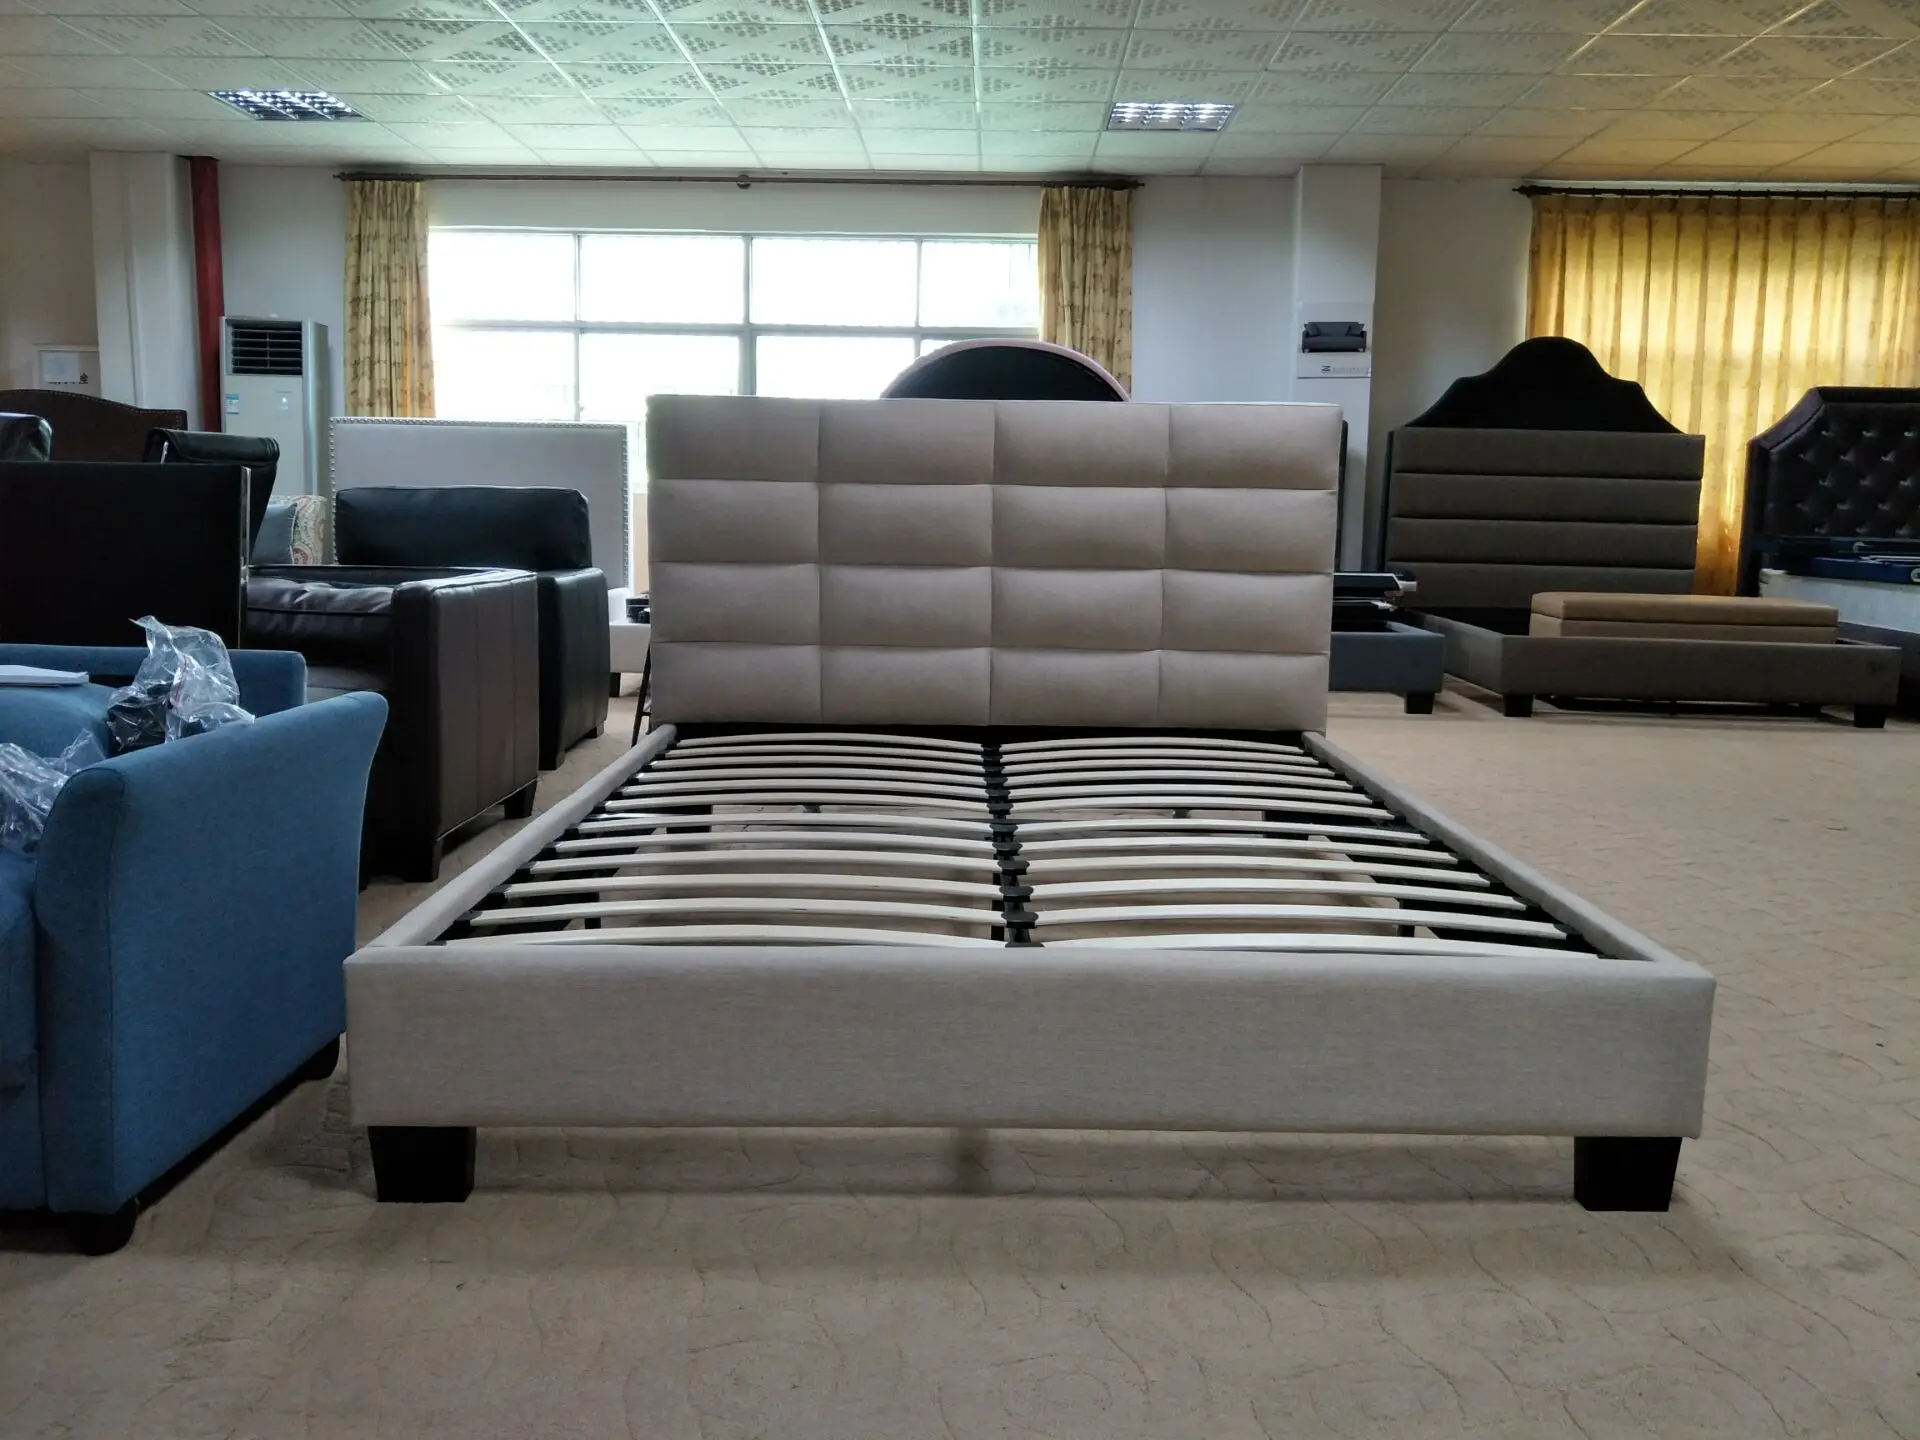 Top Home Bed Queen King Size Sex Strong Bed Frame For China Furniture